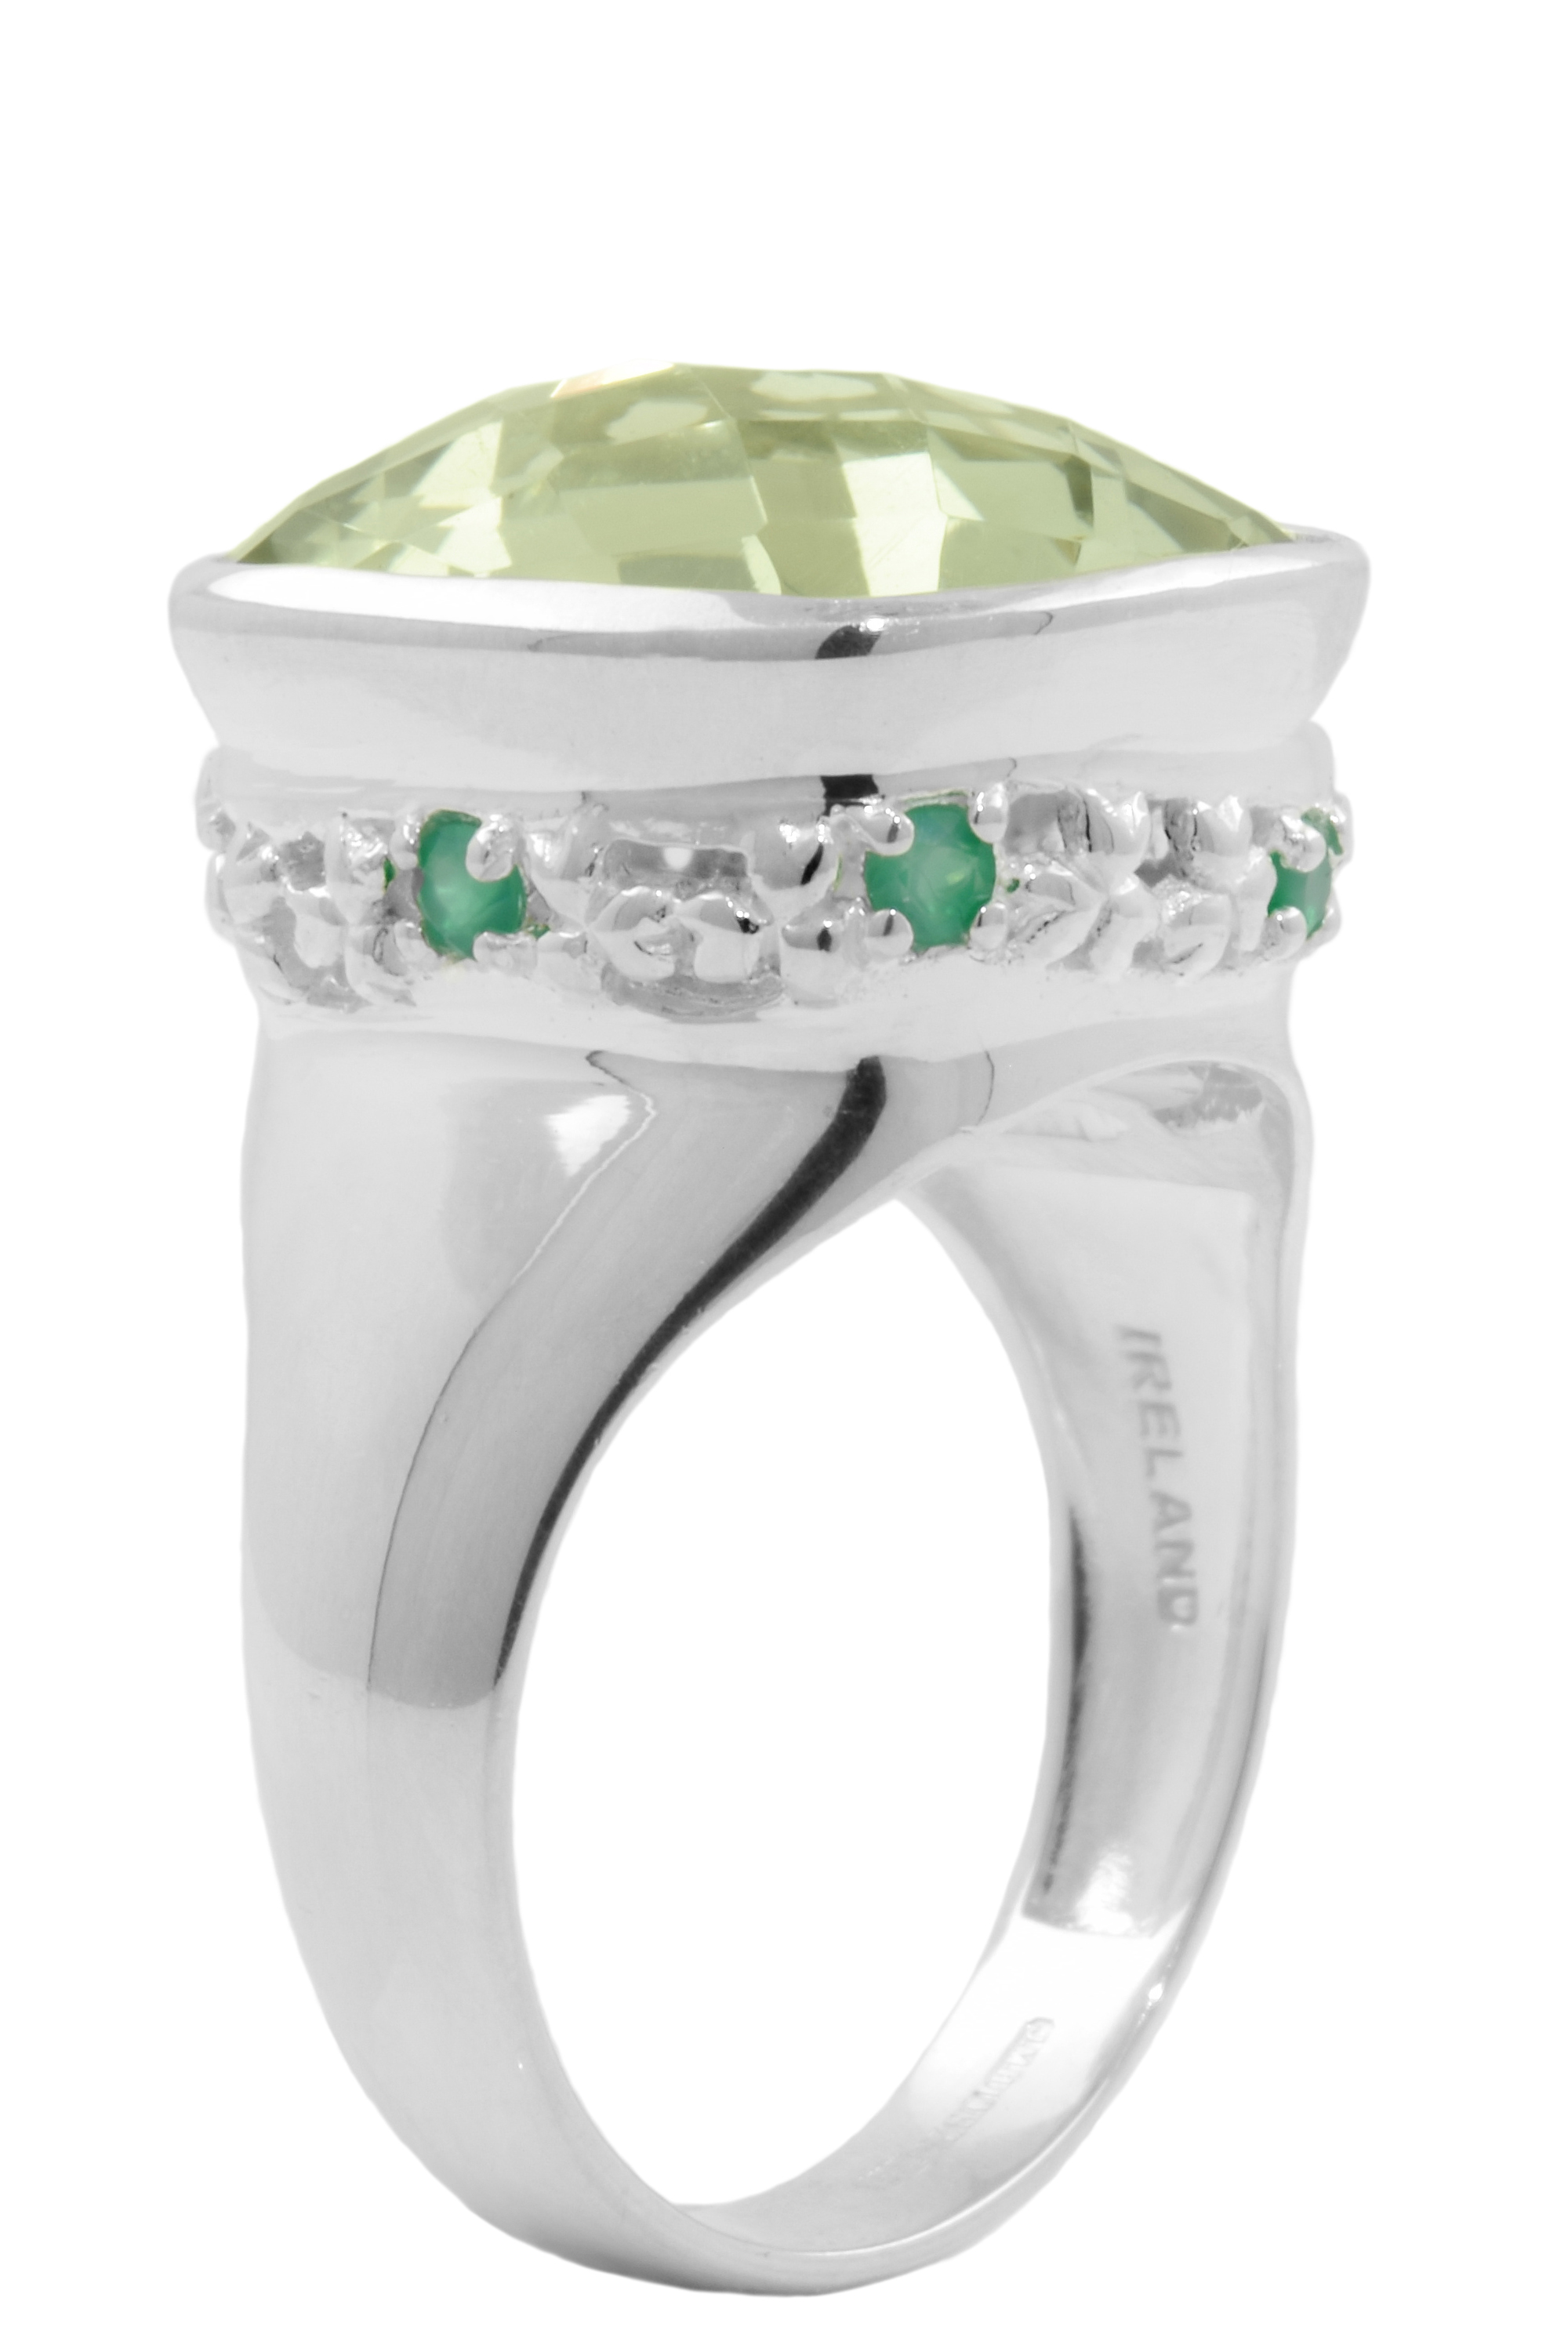 Product image for Shamrock Ring - Green Amethyst and Green Agate Shamrock Ring